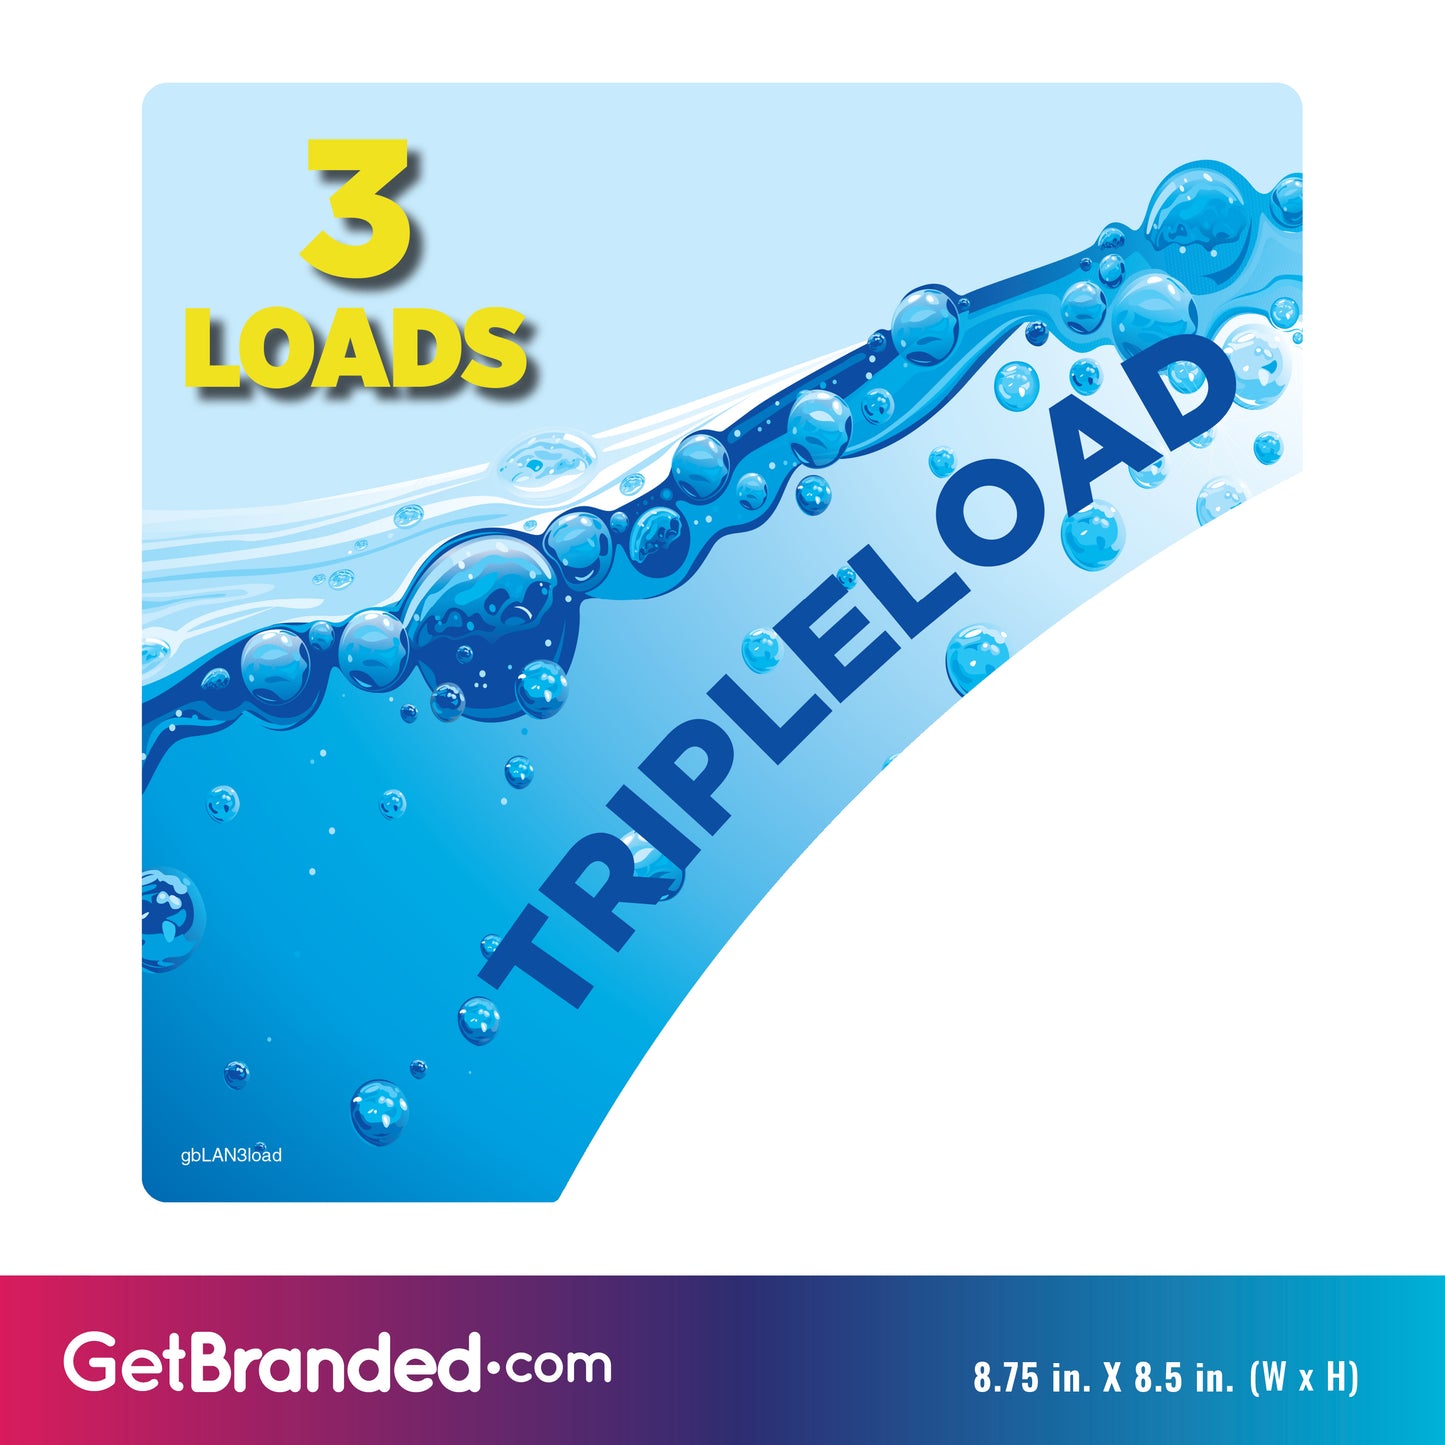 Decal for placement on washing machines at Laundromat displaying Tripleload - 3 Loads in size. Measurement details.